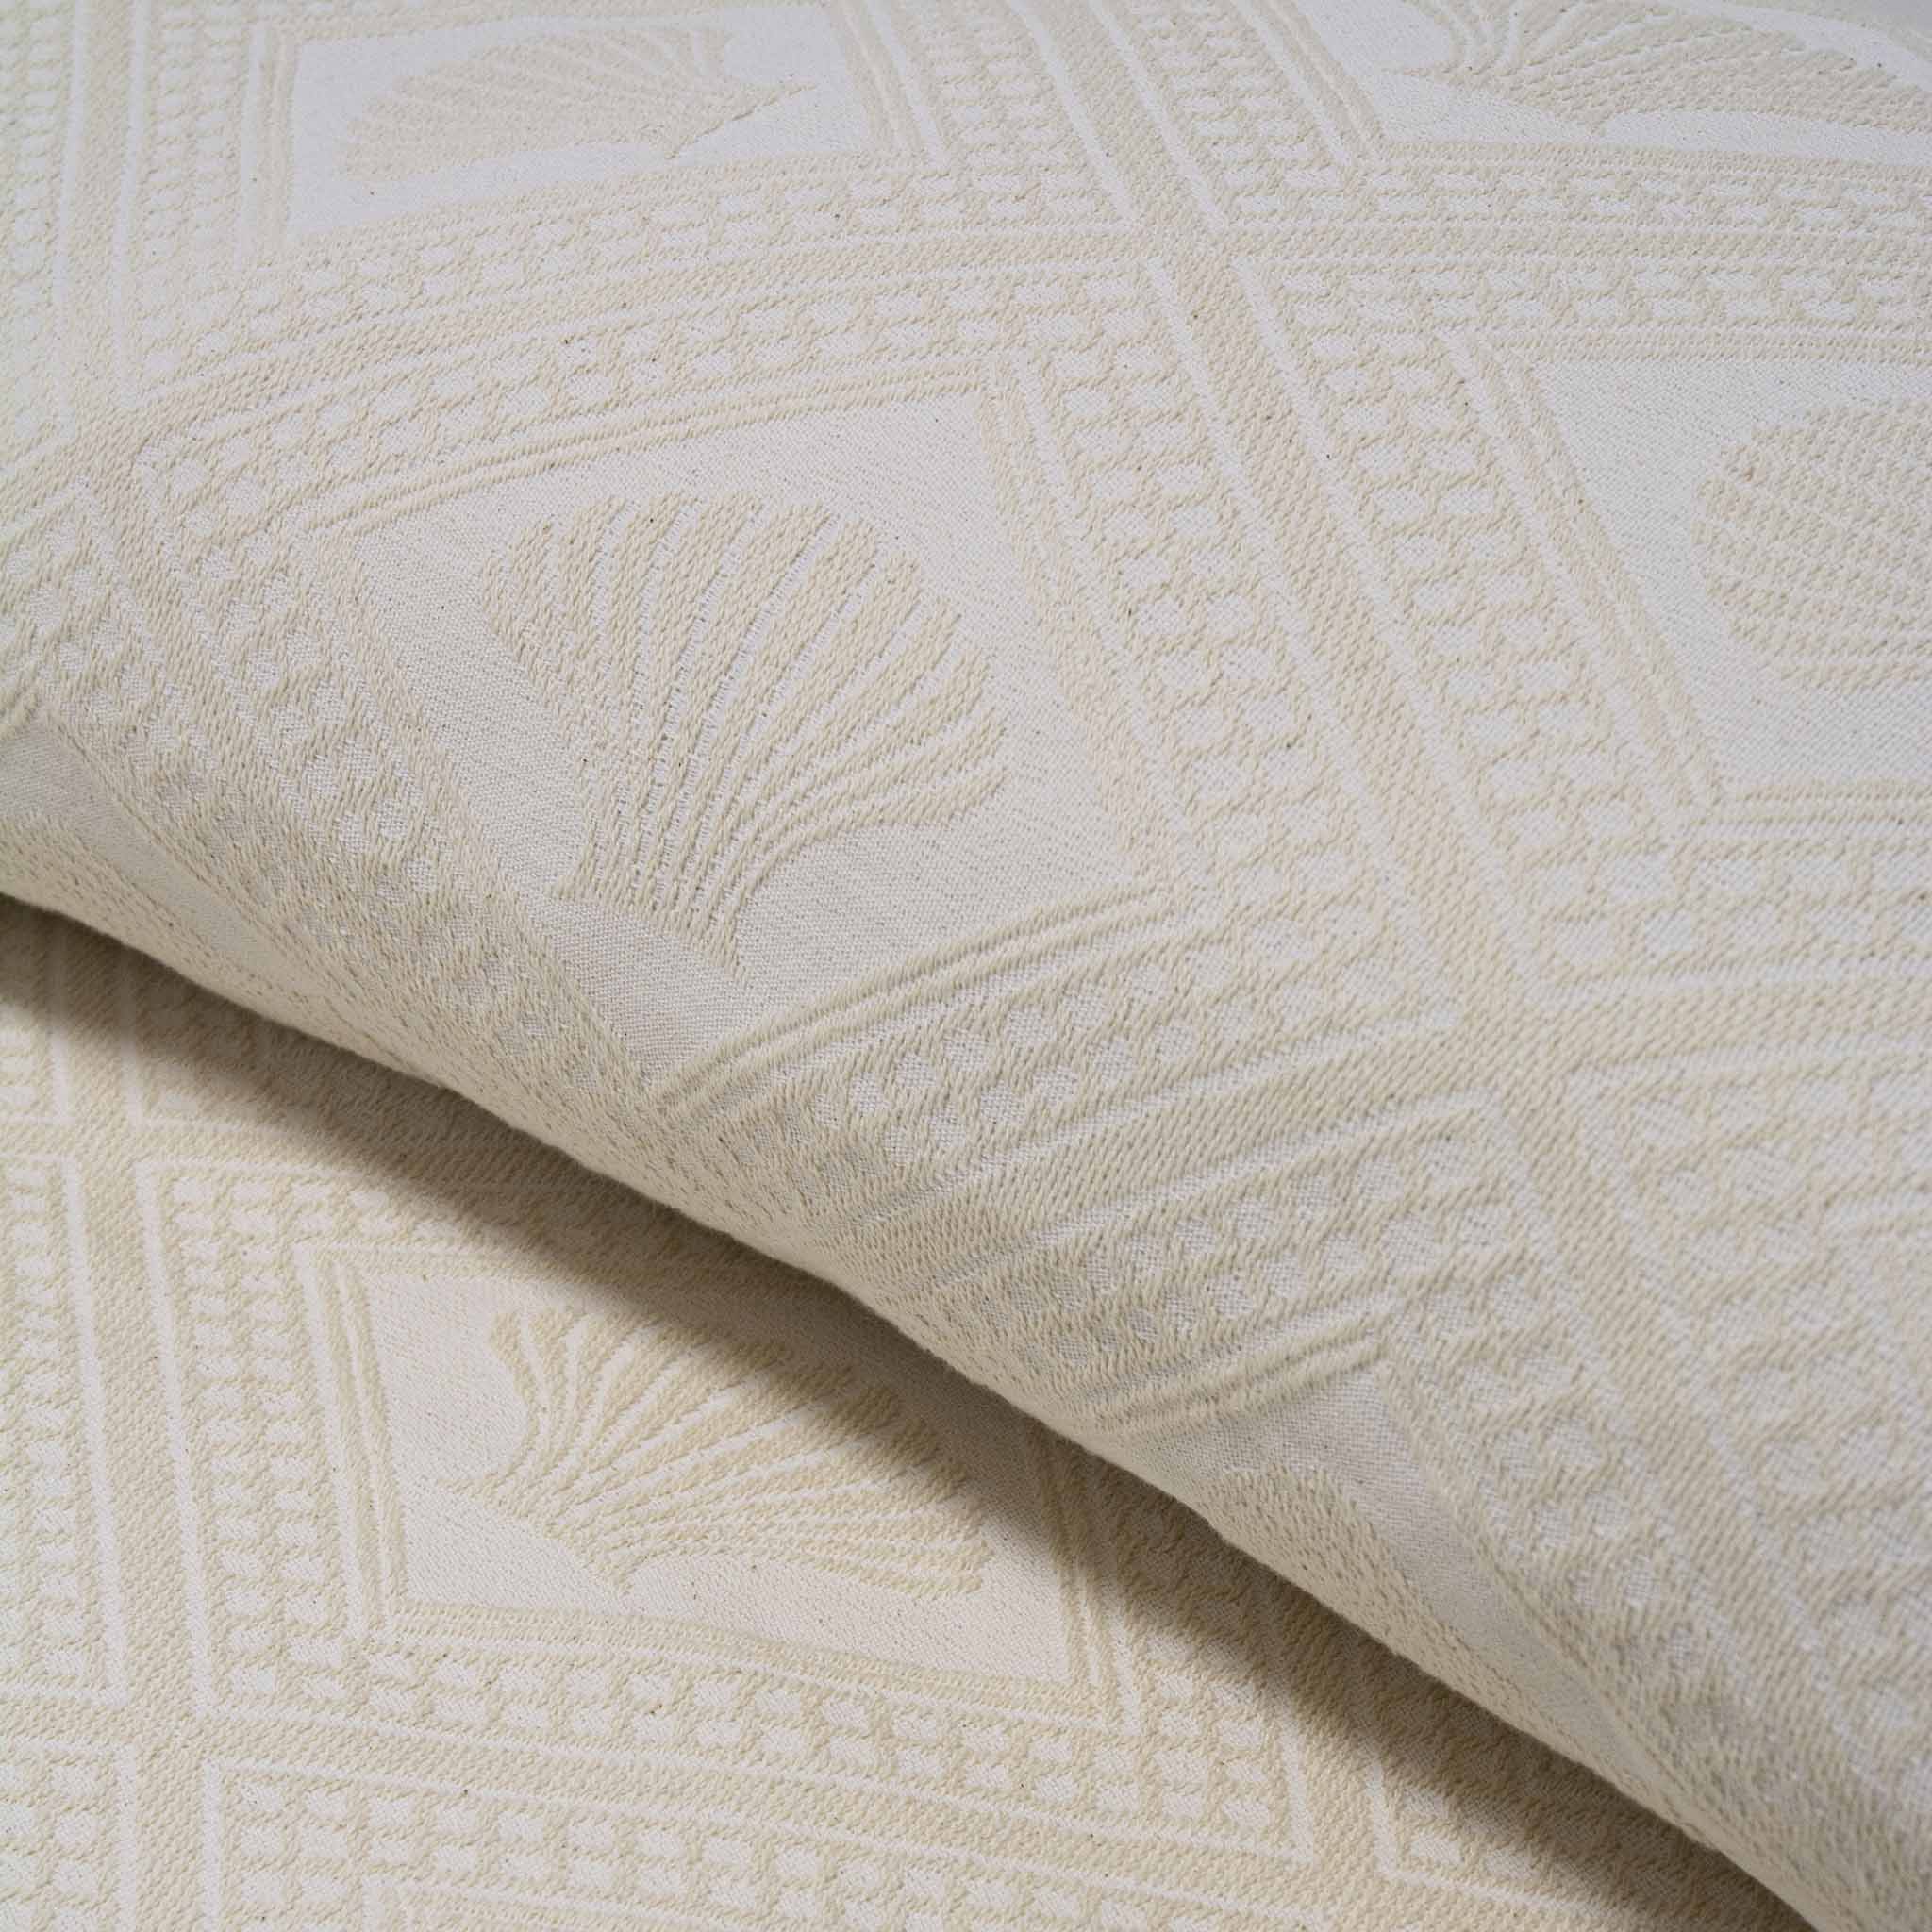 Avalon Jacquard Bedspreads by Bargoose Home Textiles Jacquard Bedspreads Bargoose Home Textiles, Inc. 